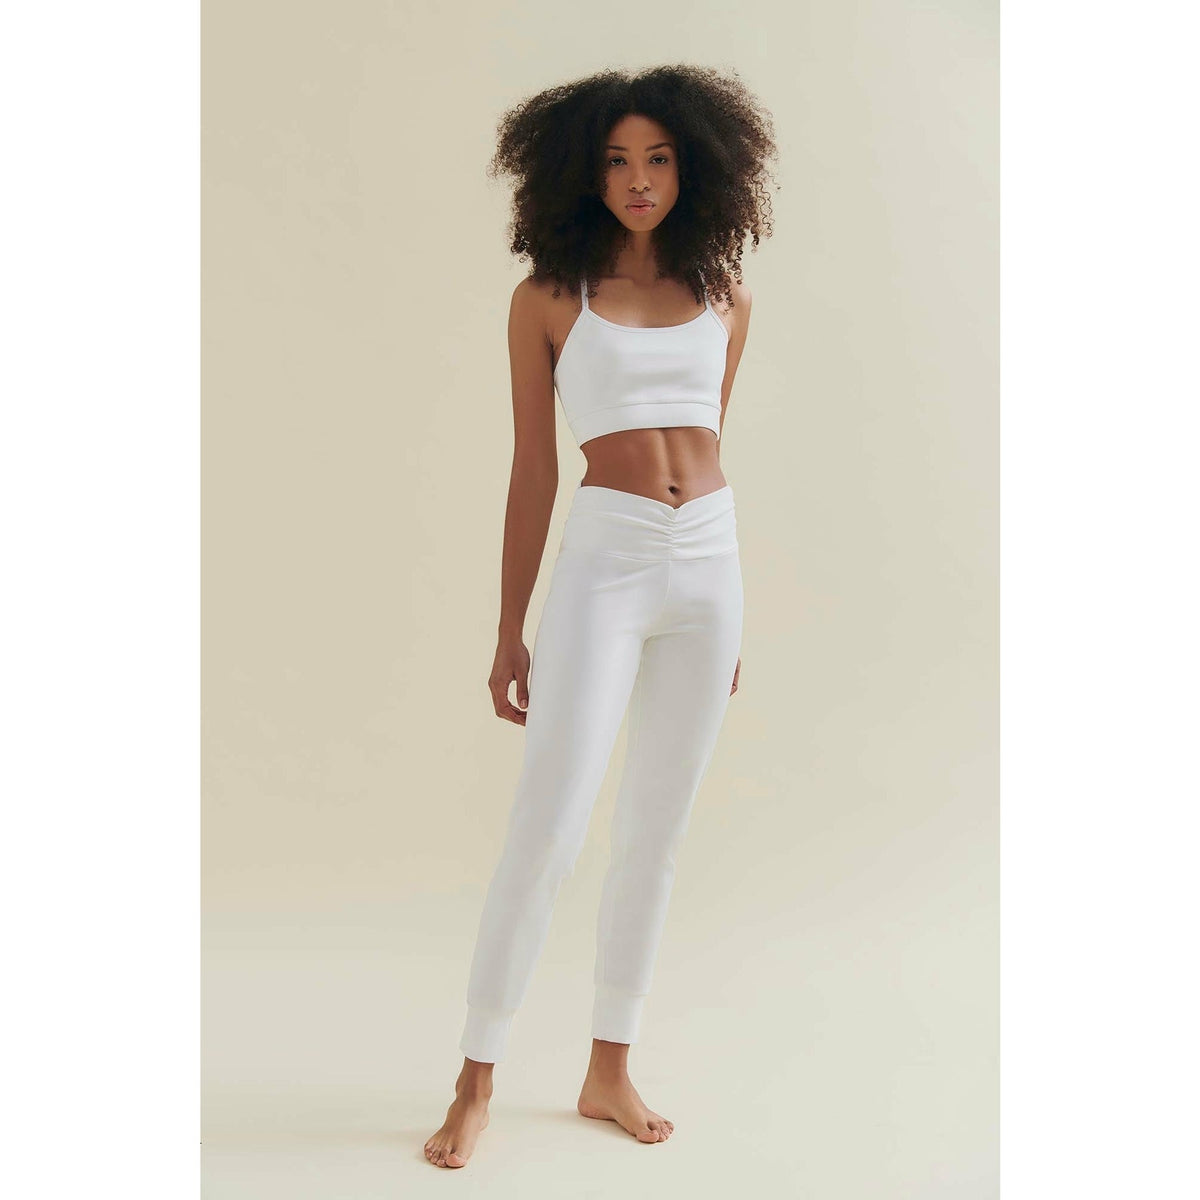 womens yoga pants in white by wellicious worn by a model 